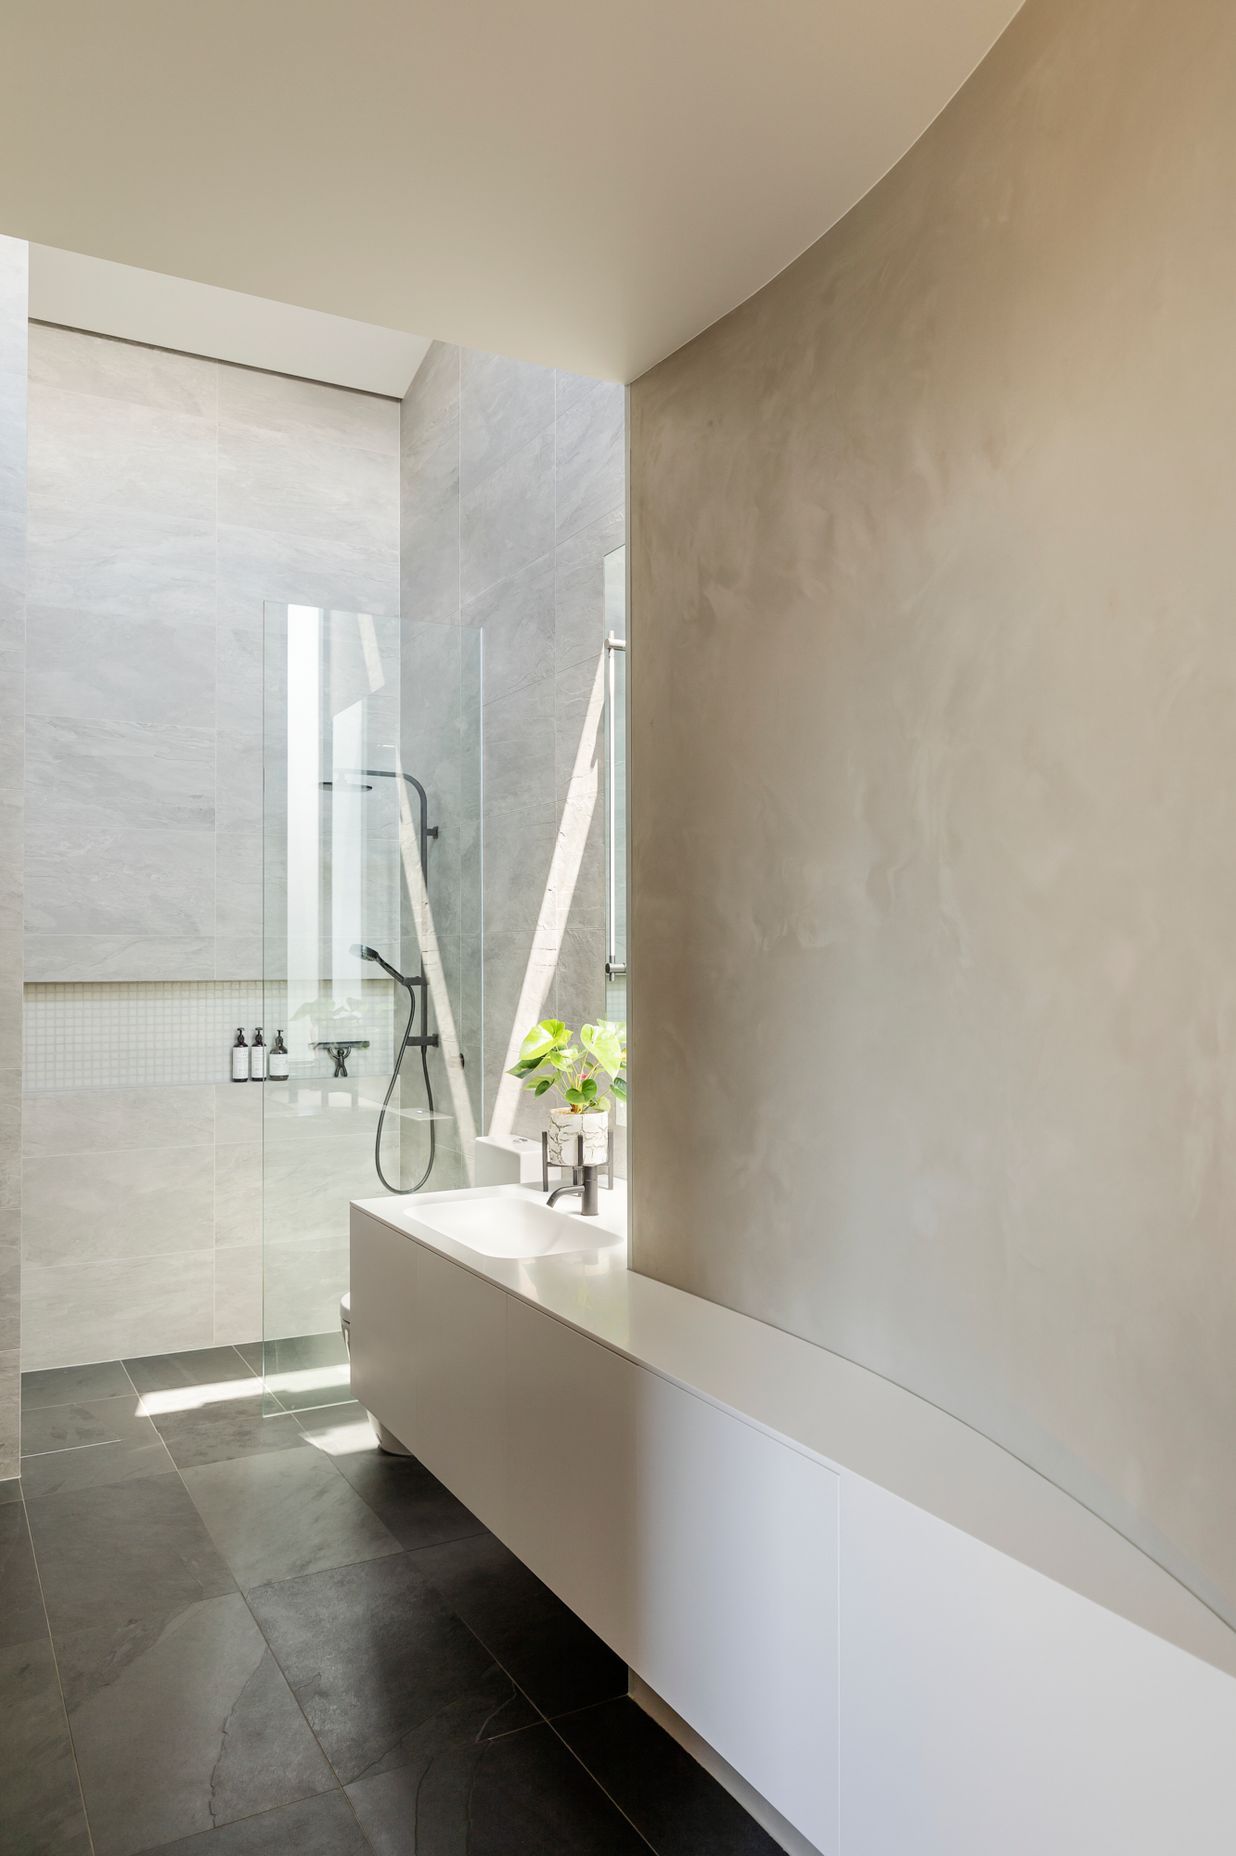 The ensuite bathroom maximises the internal curves formed by the curved garage walls.